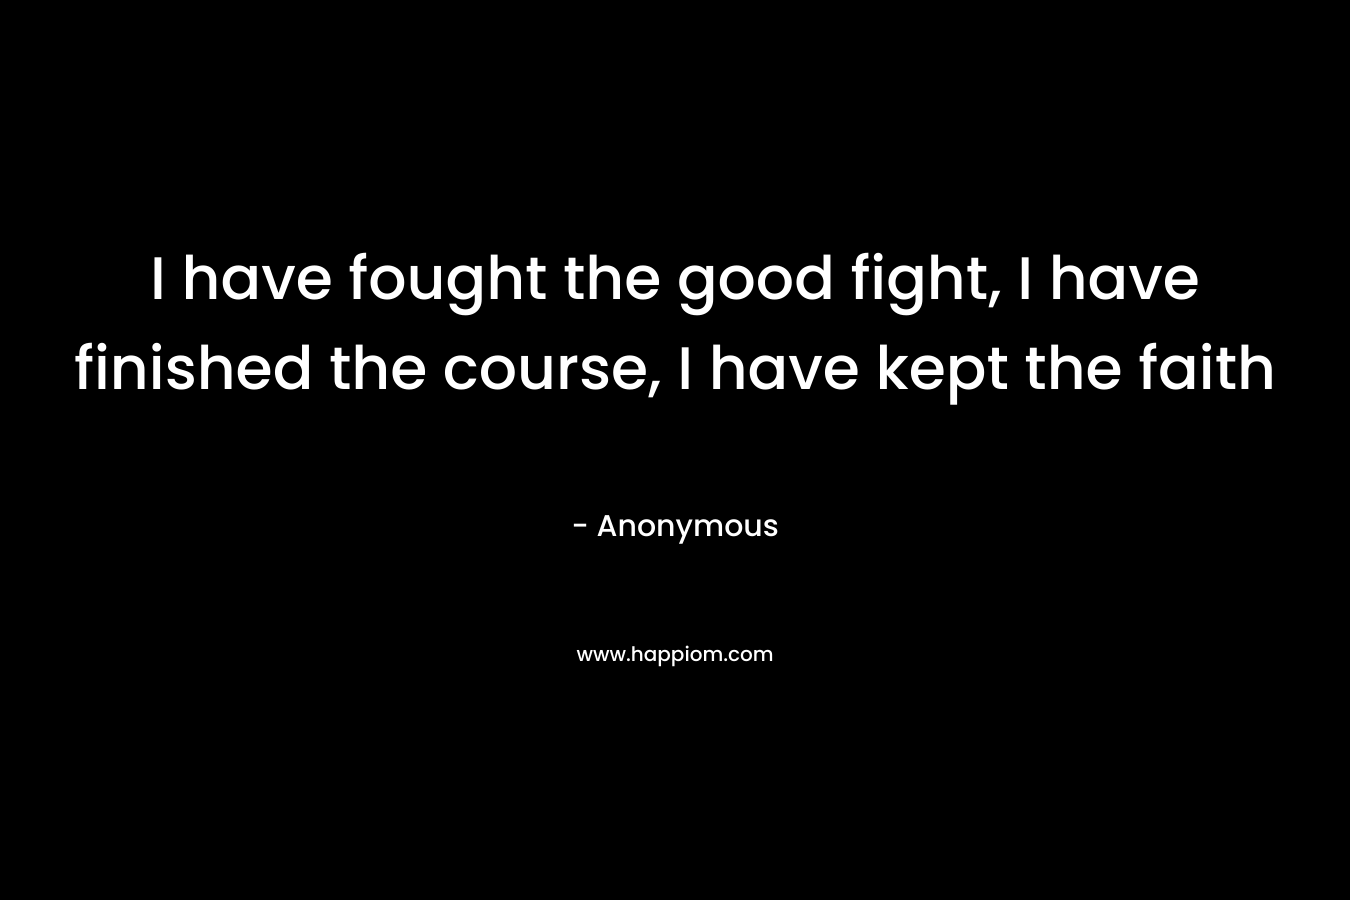 I have fought the good fight, I have finished the course, I have kept the faith